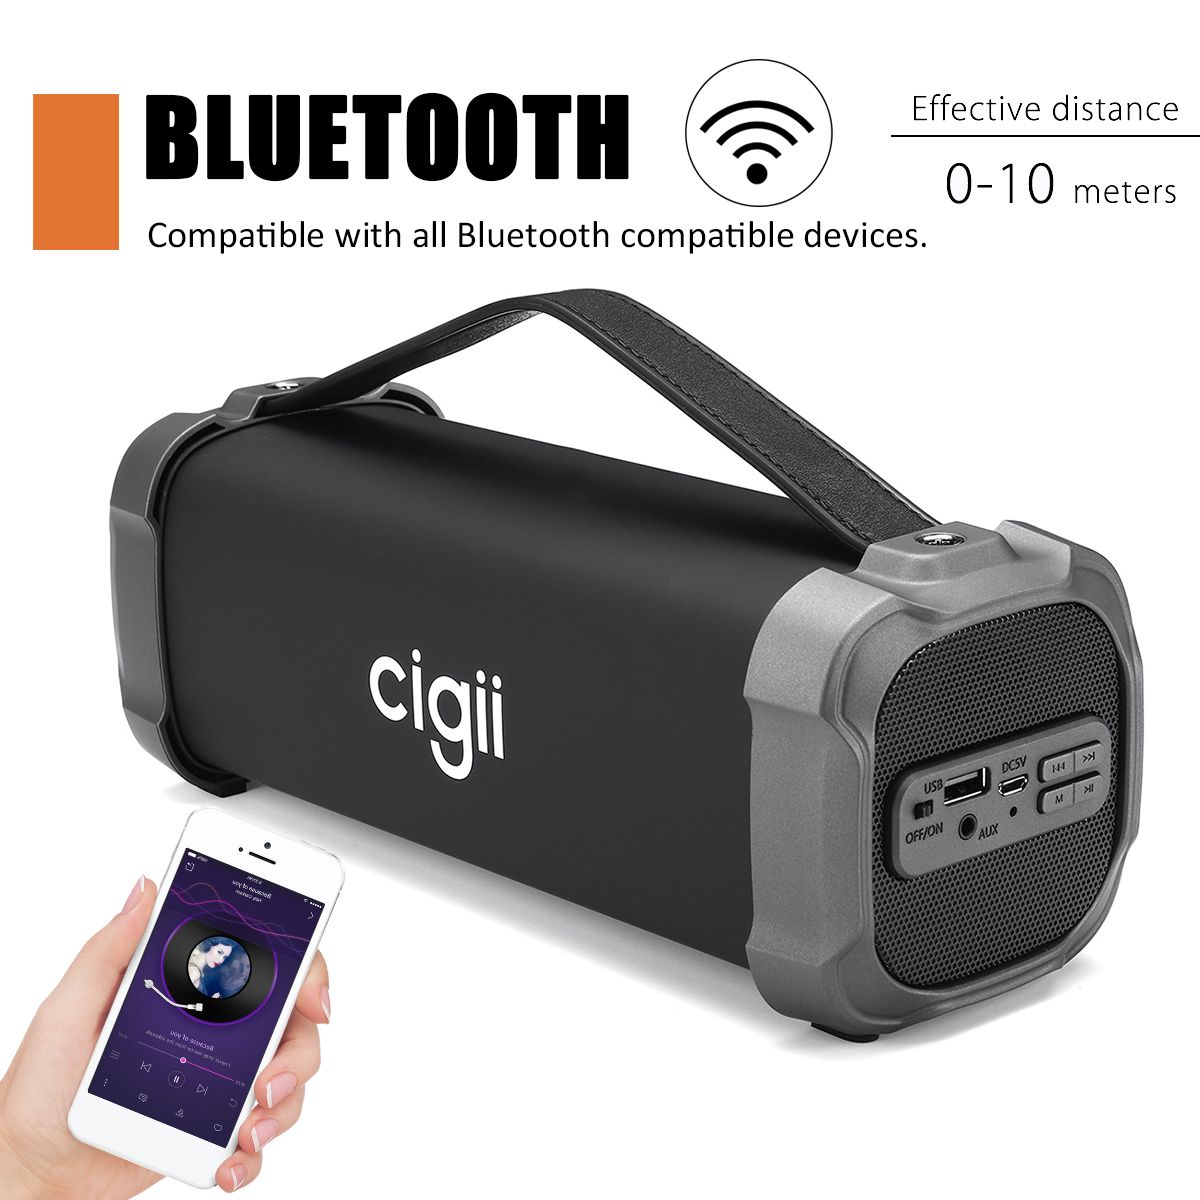 Portable-Wireless-Player-bluetooth-Audio-Speaker-HIFI-Bass-Surround-Sound-With-Mic-Support-AUX-FM-US-1416349